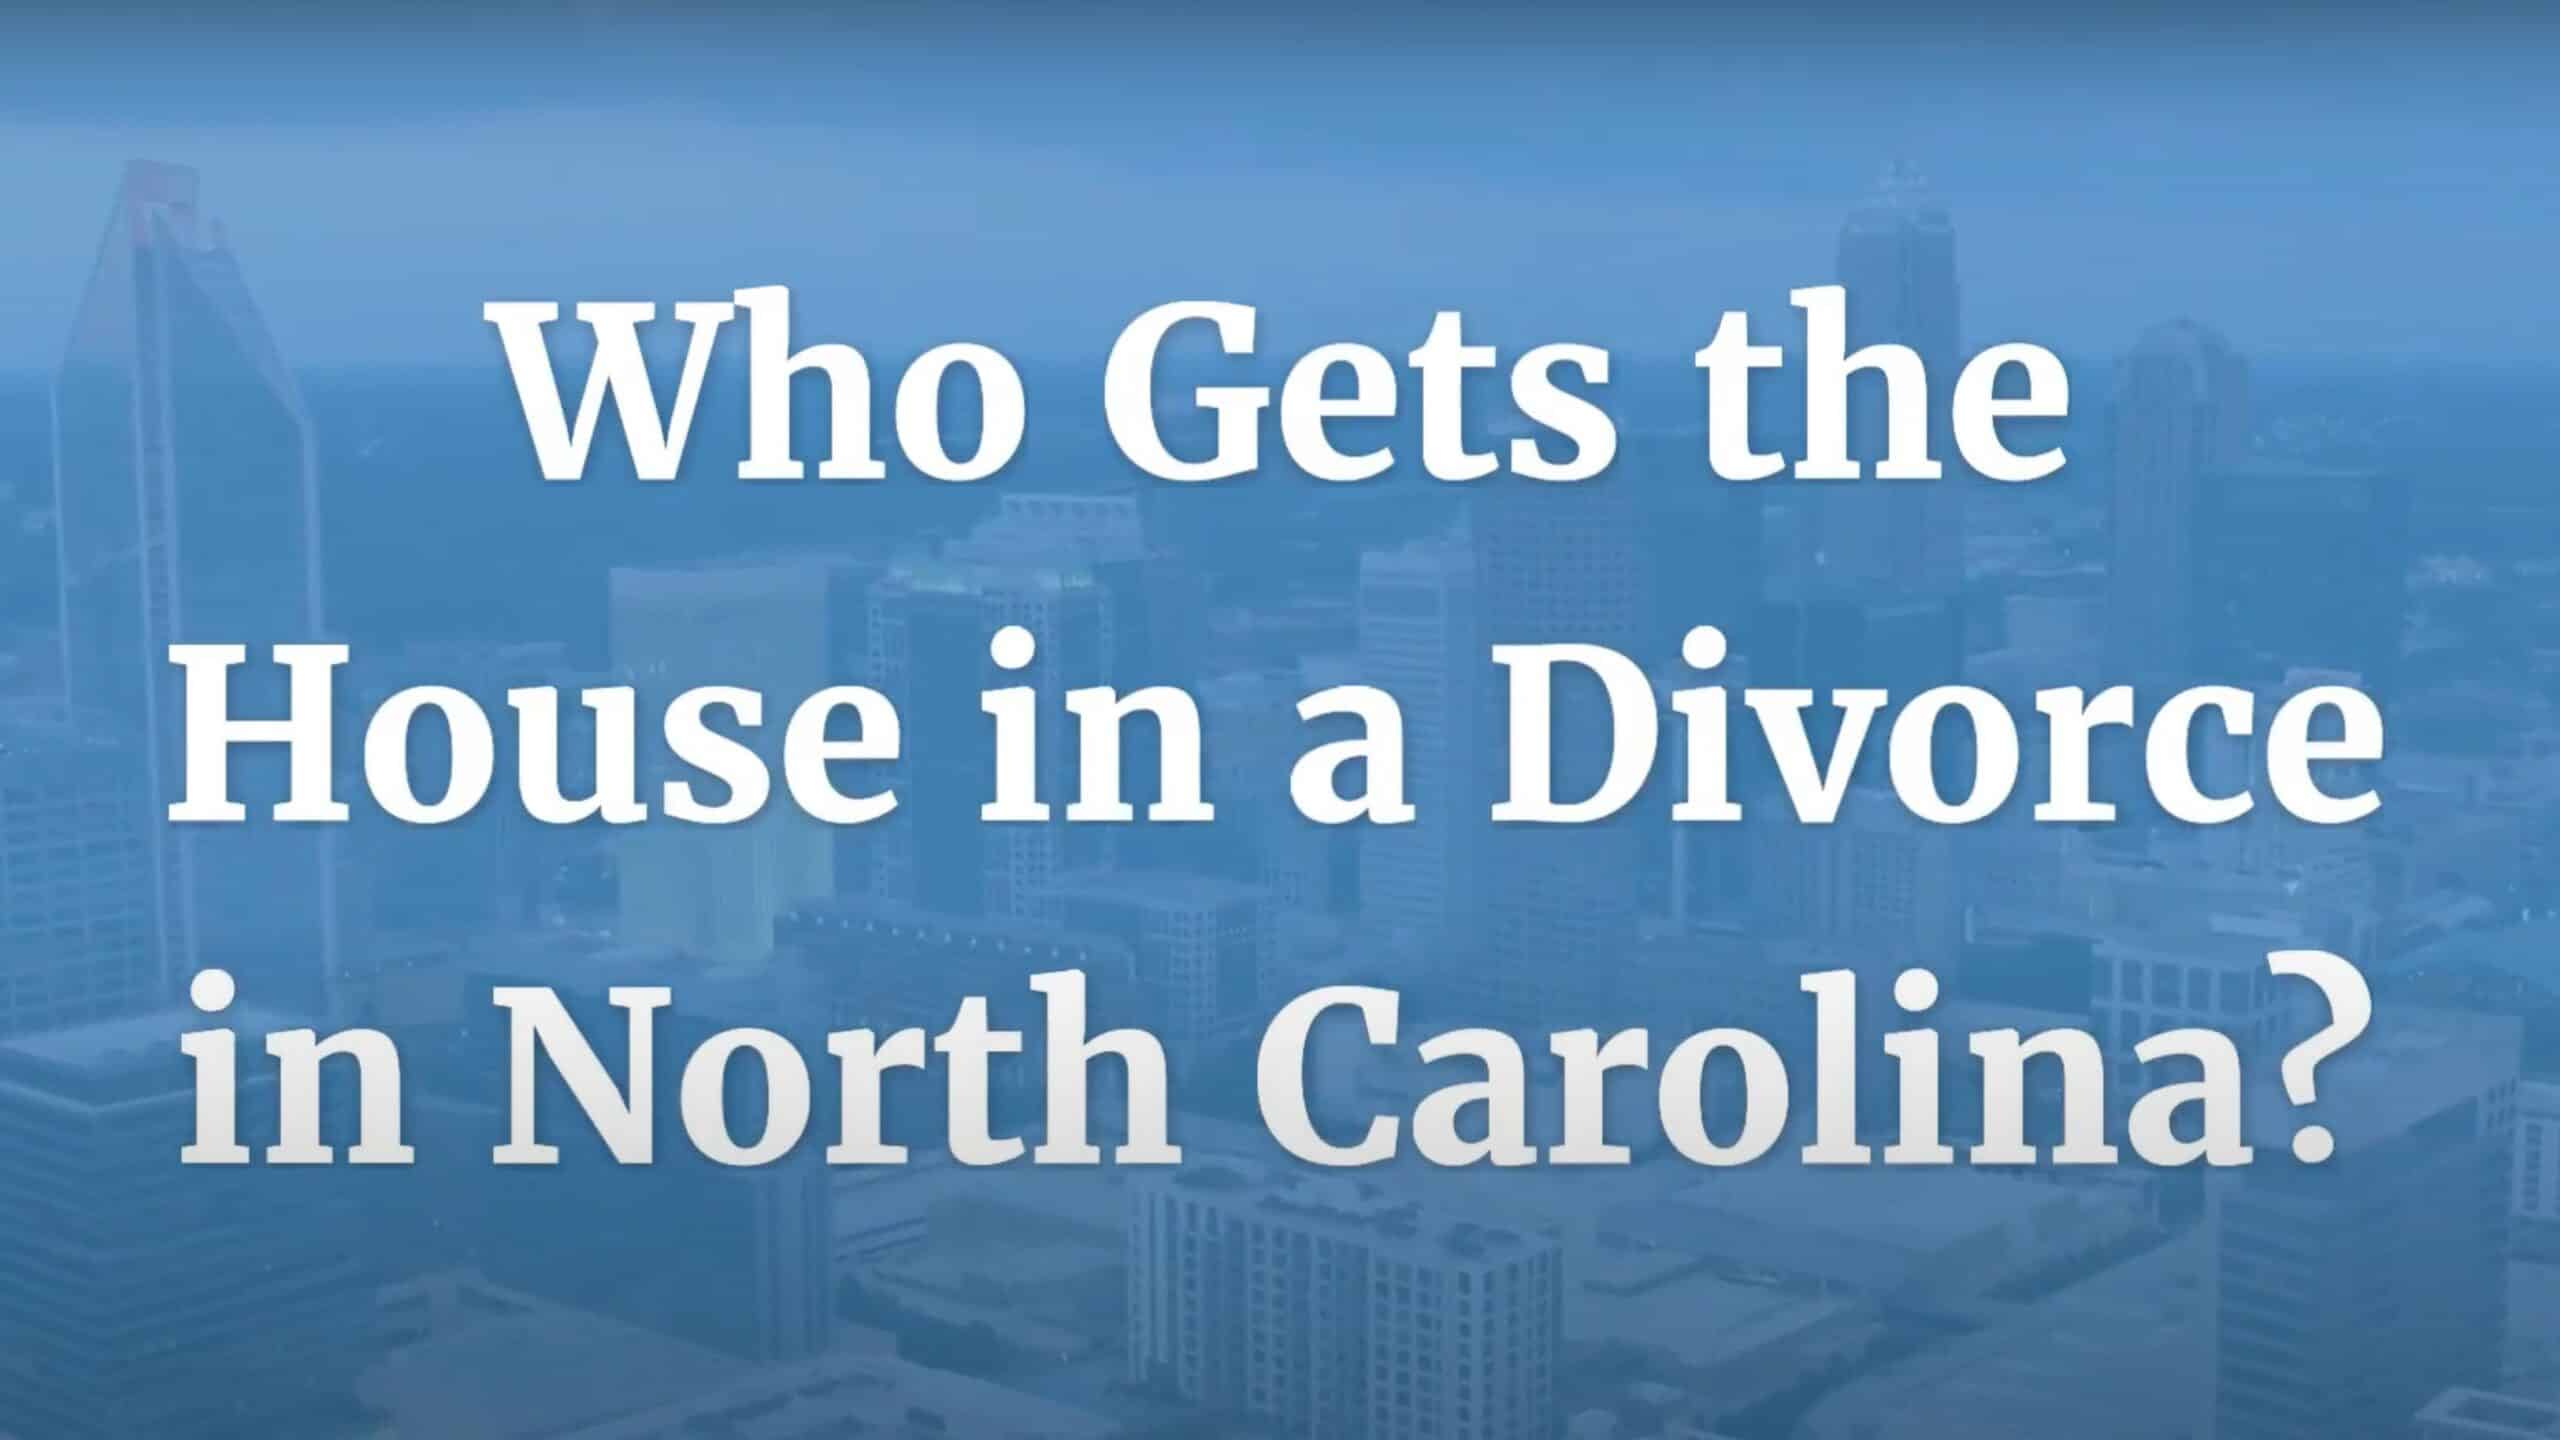 Who gets the house in a divorce in North Carolina?